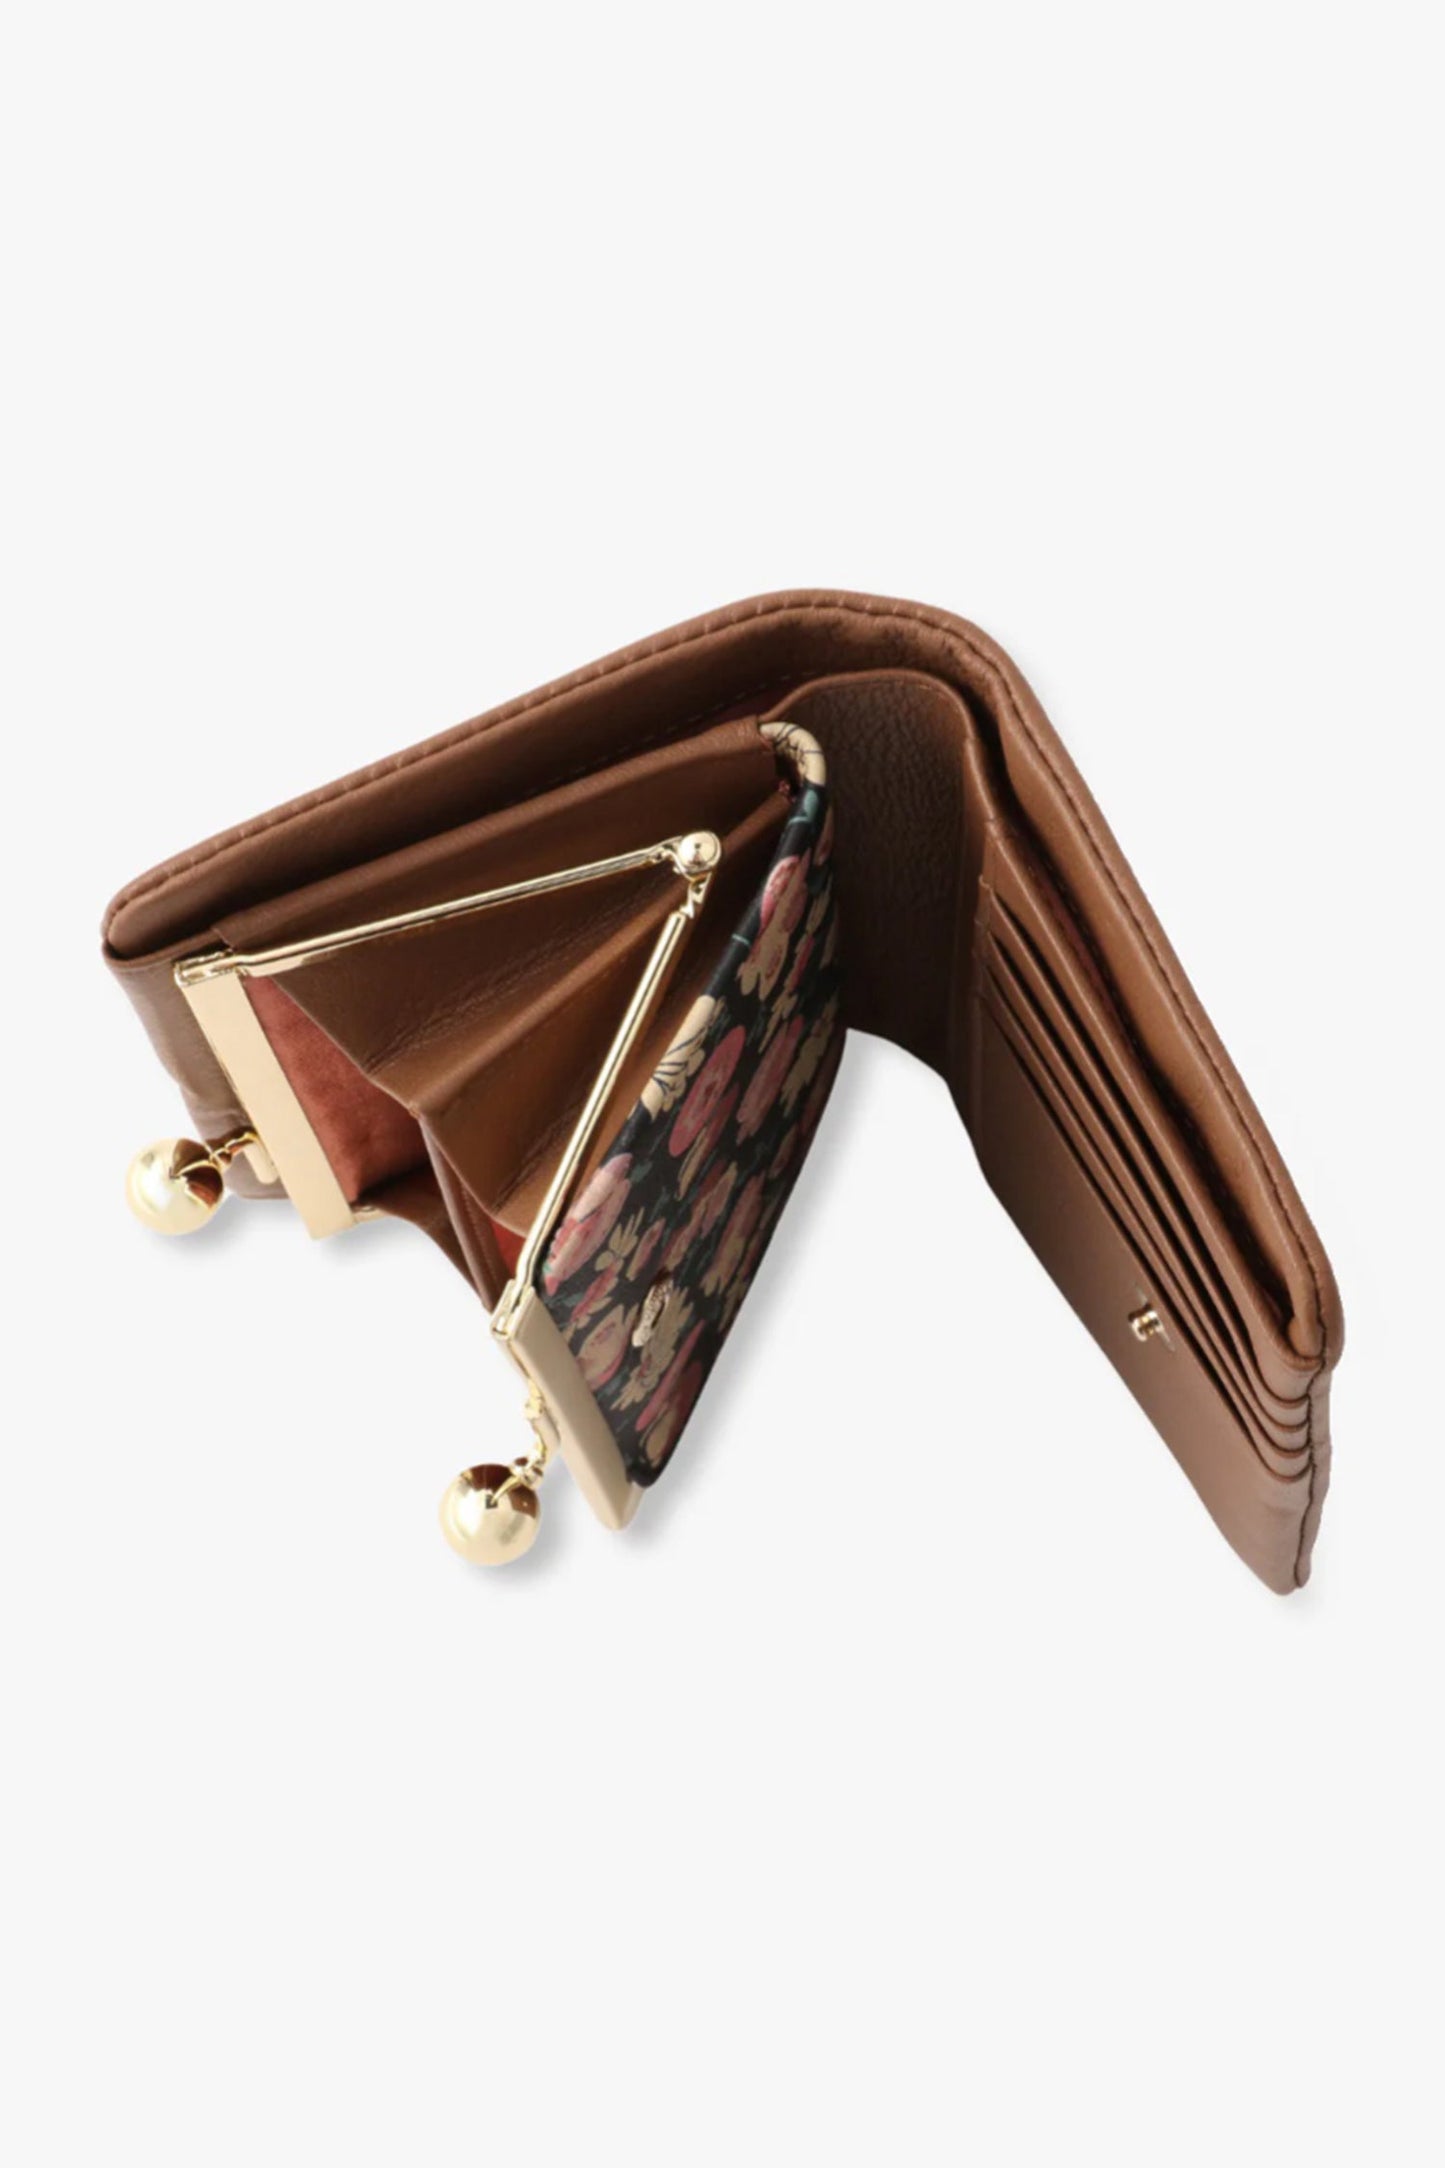 Penny Loafer Small Wallet